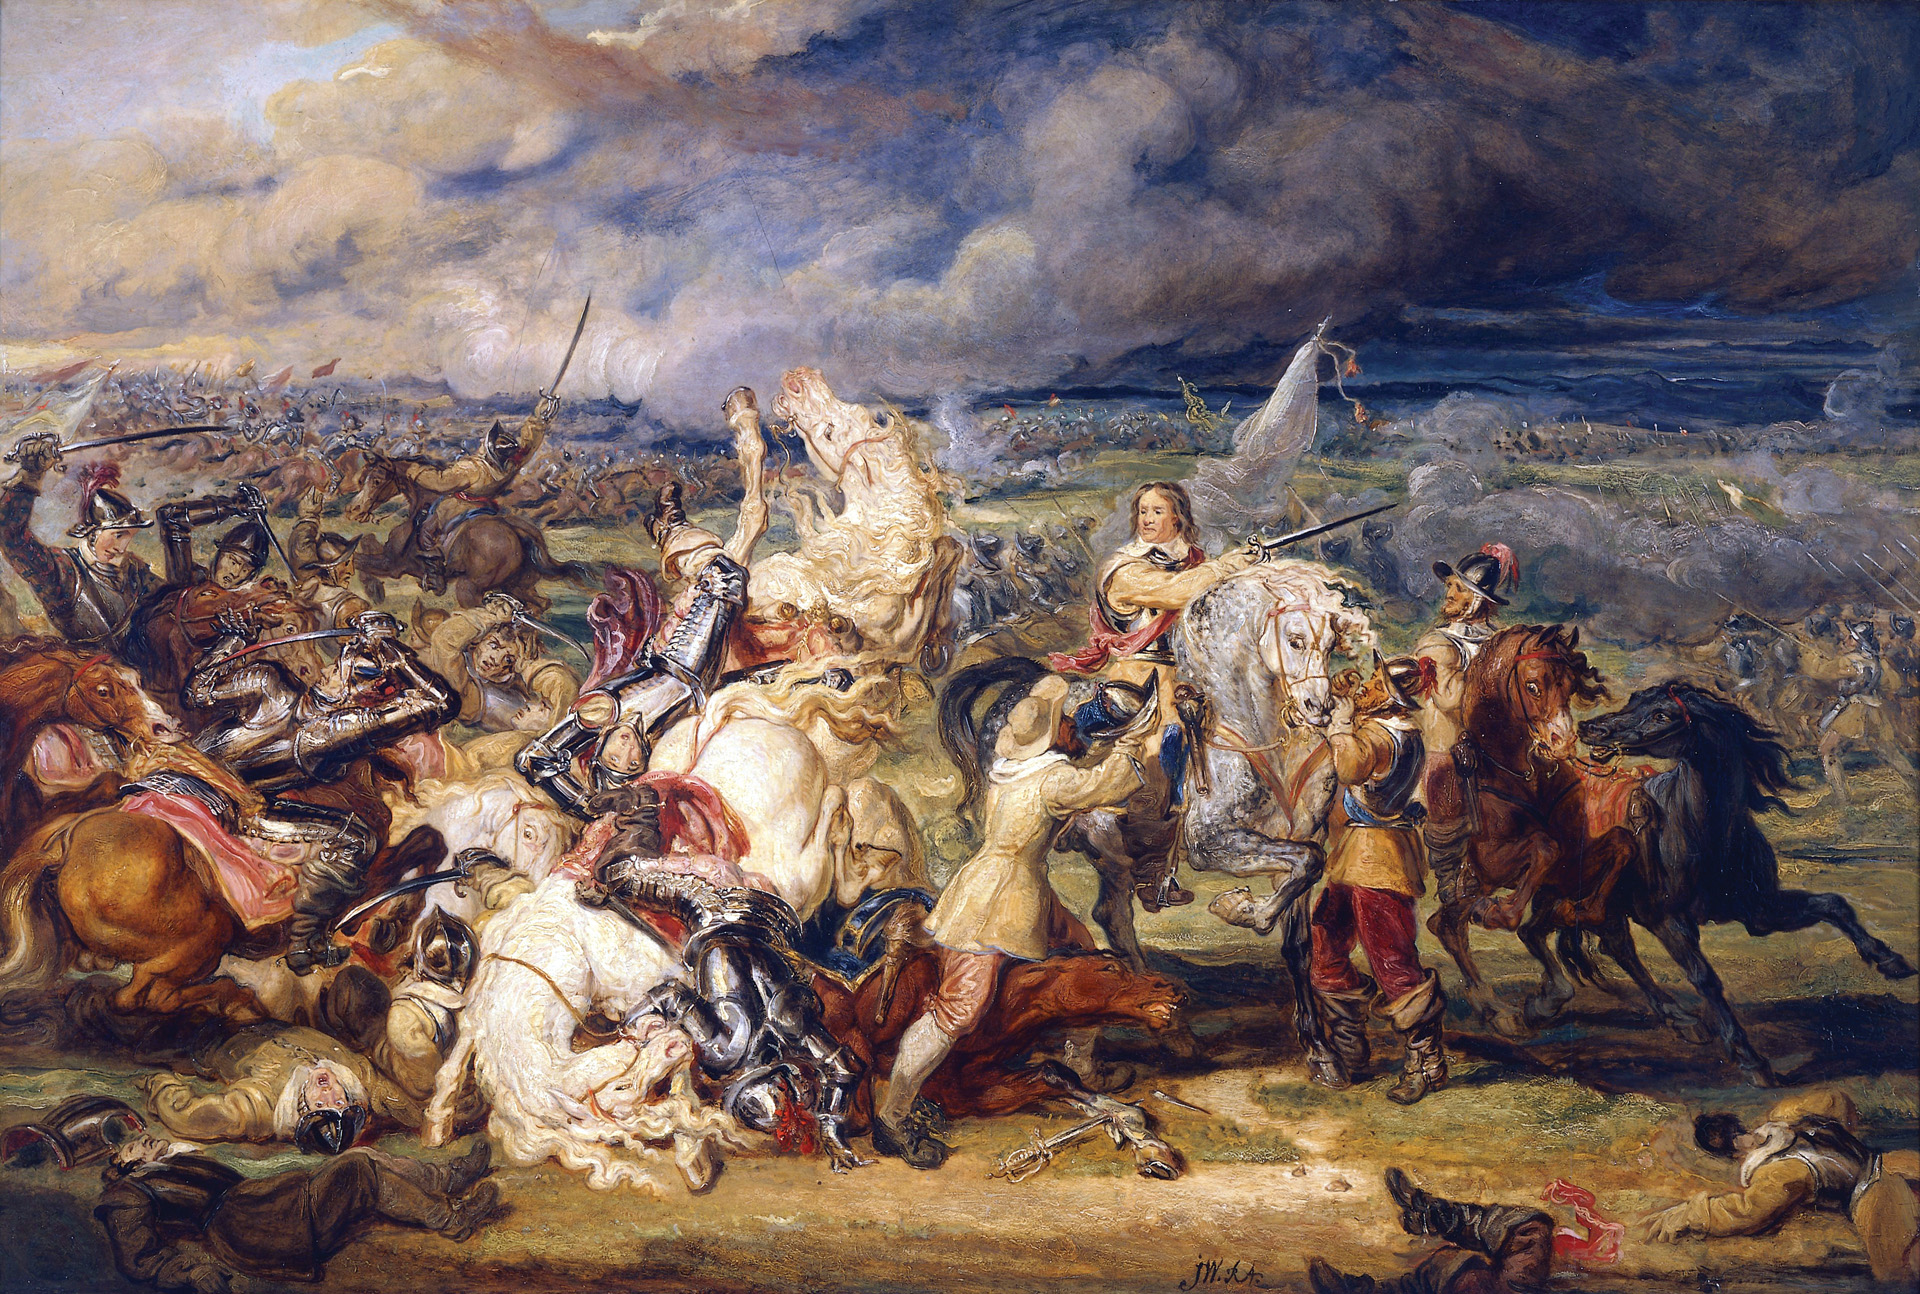 Cromwell’s cavalry played an instrumental role in the Parliamentary-Covenanter victory at Marston Moor.